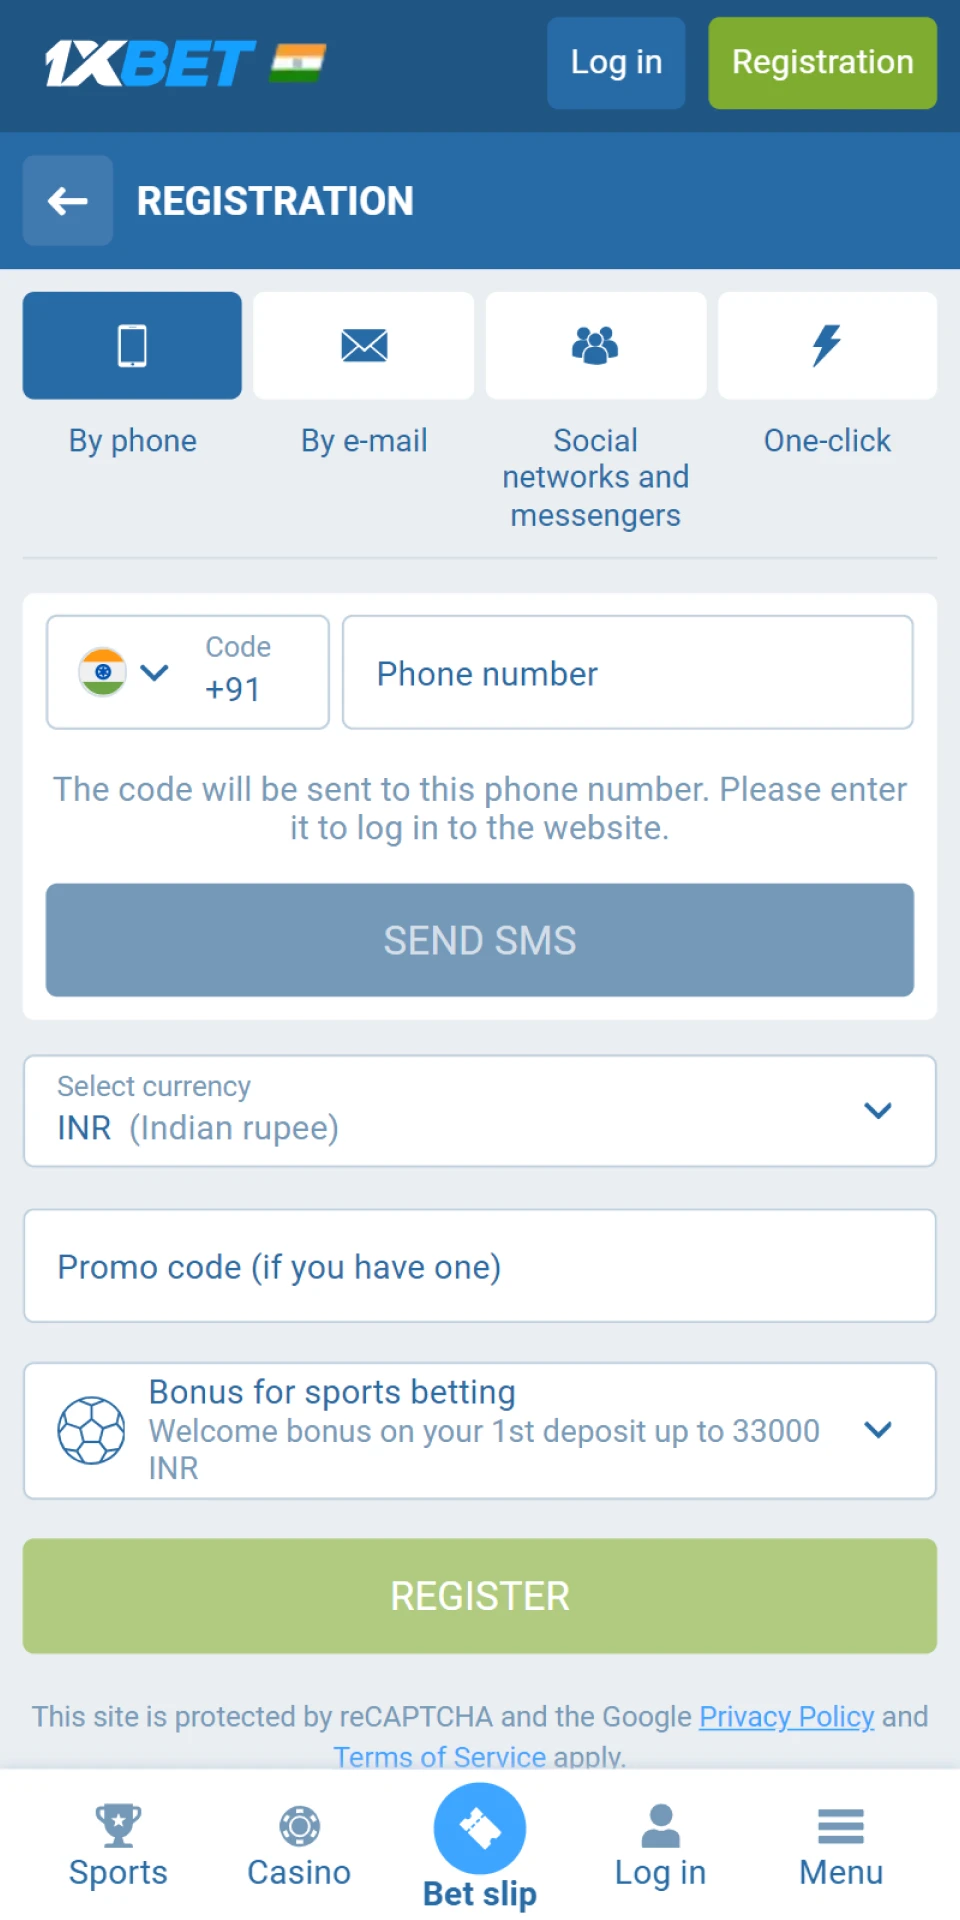 Use your favorite registration method in the 1xBet app.